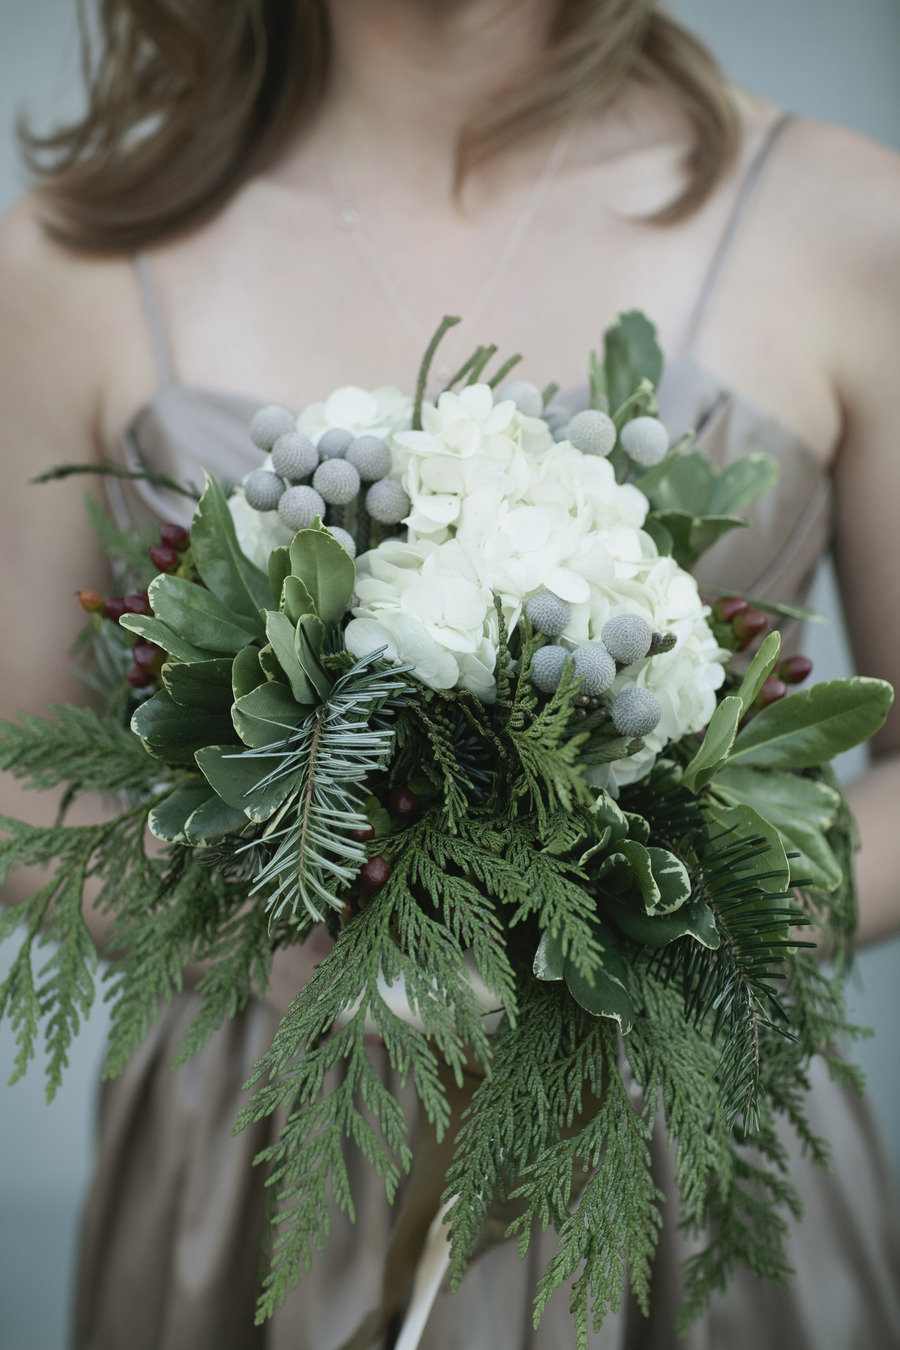 Evergreen and white flowers in a bouquet.